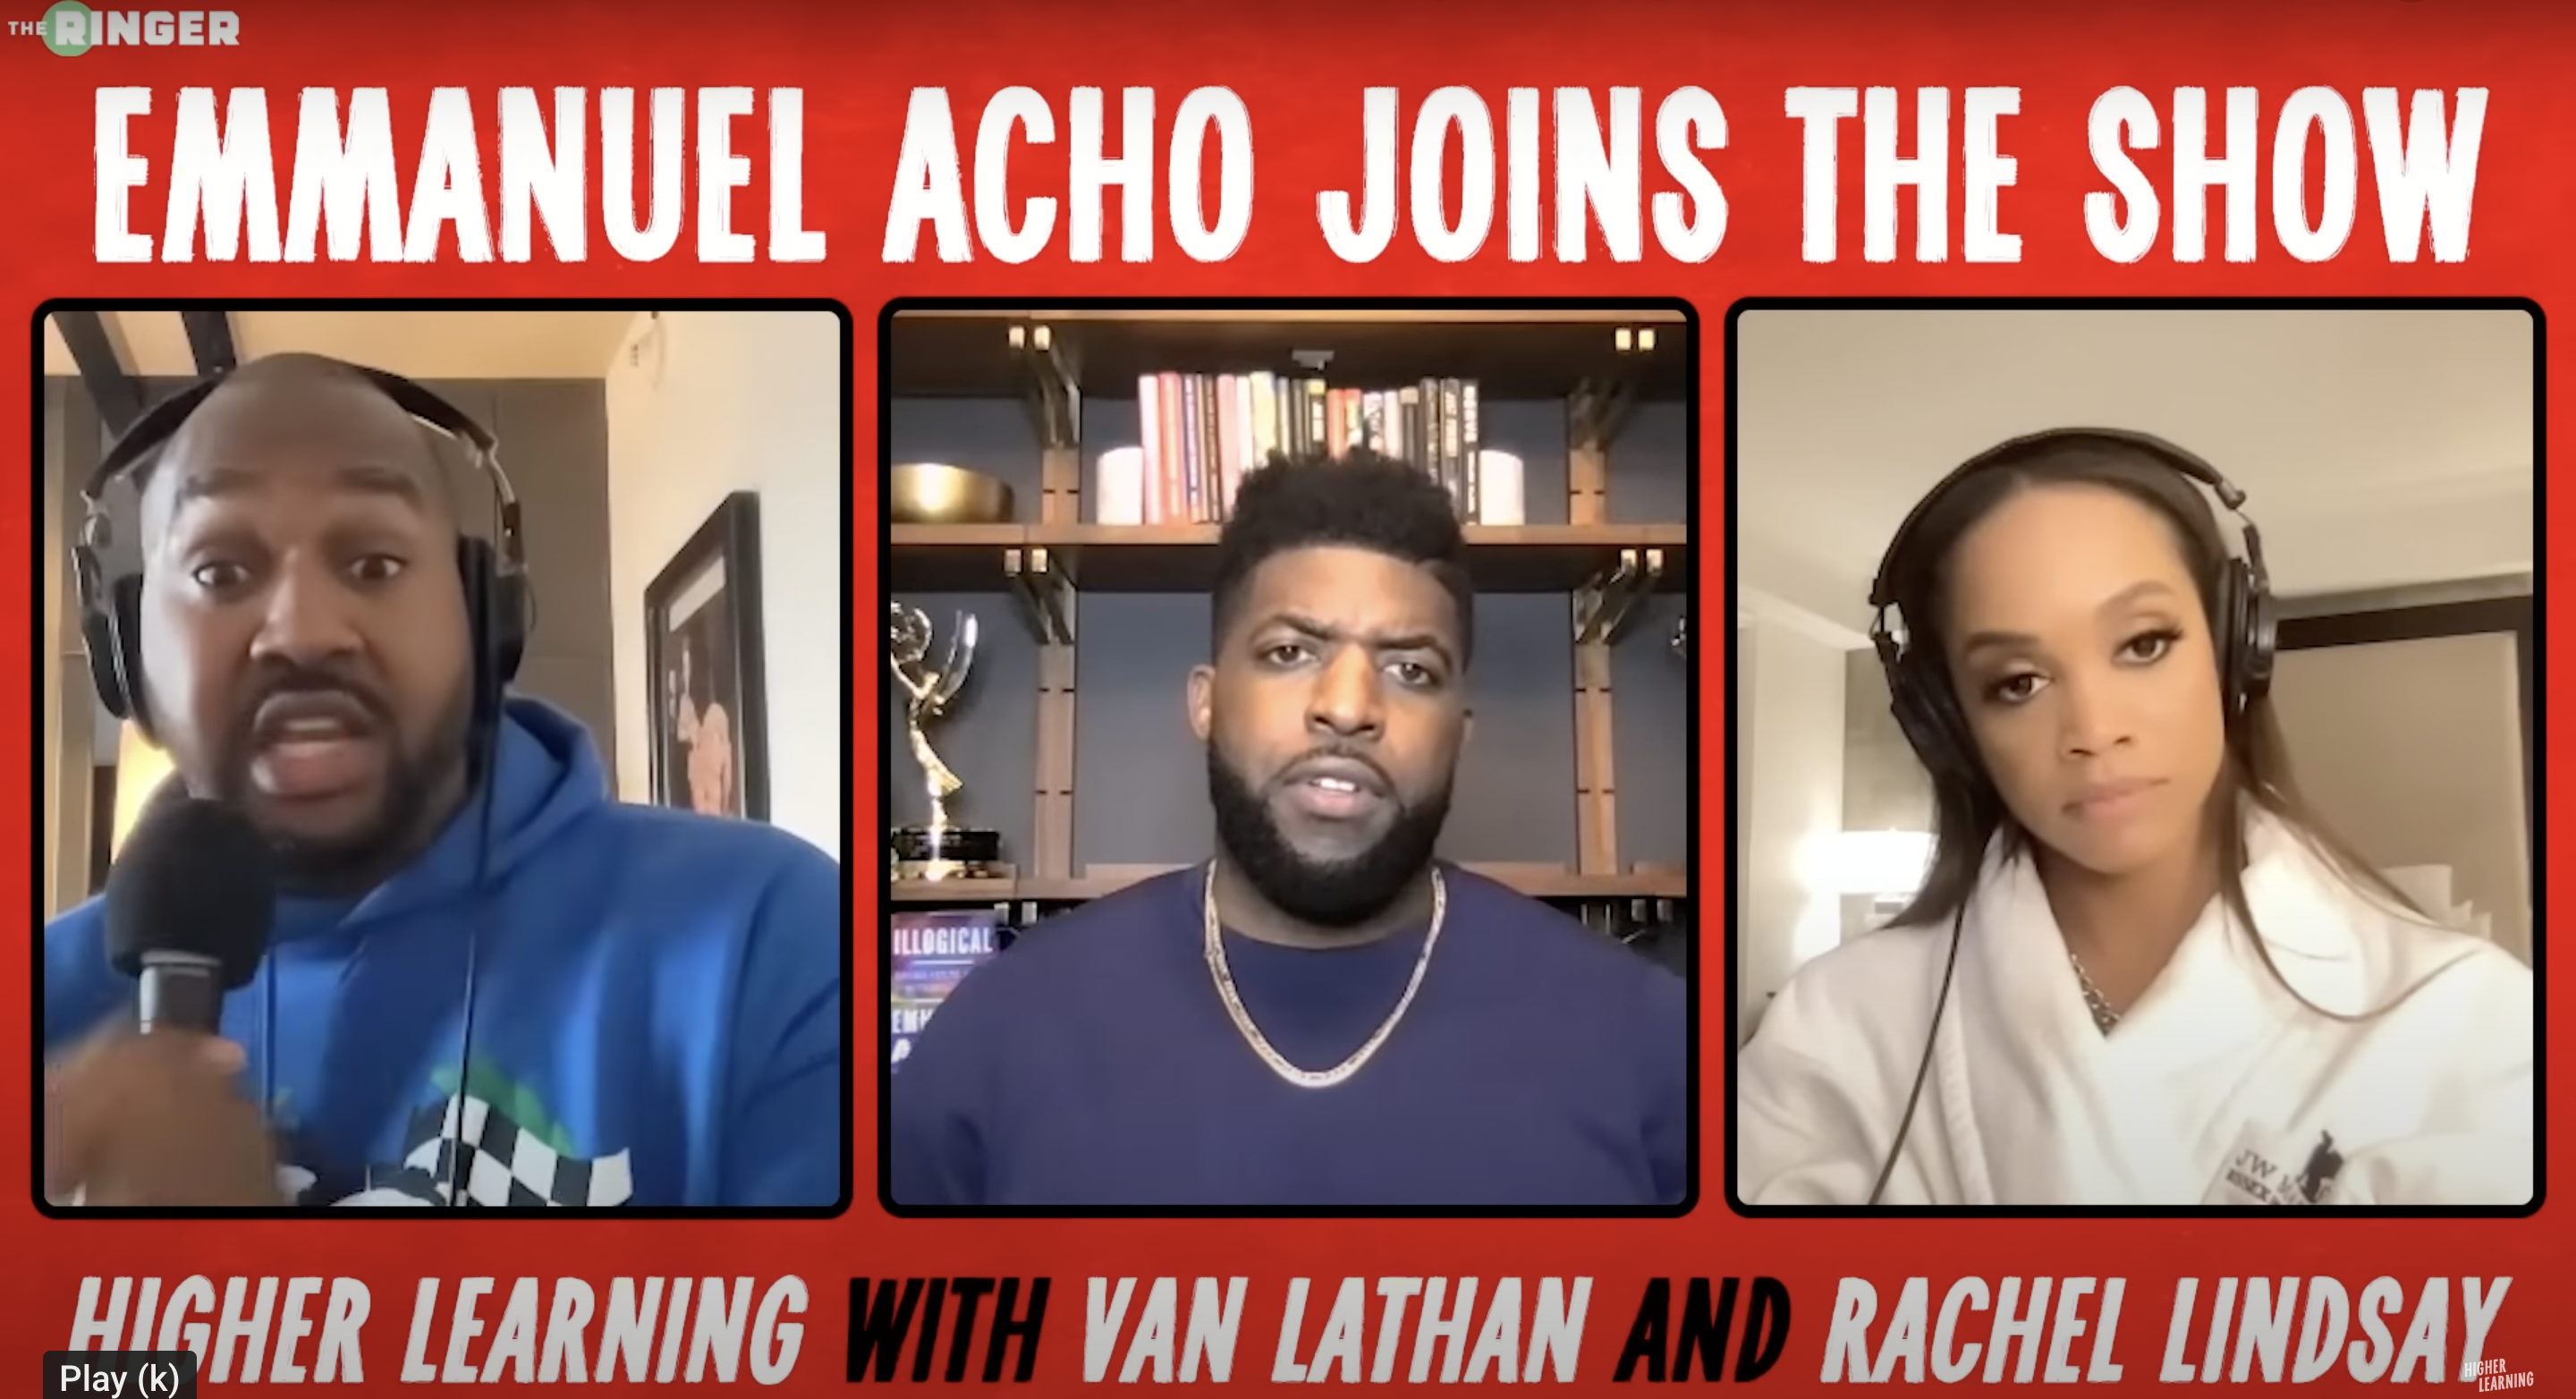 Higher Learning with Van Lathan, Rachel Lindsay, and guest Emmannuel Acho